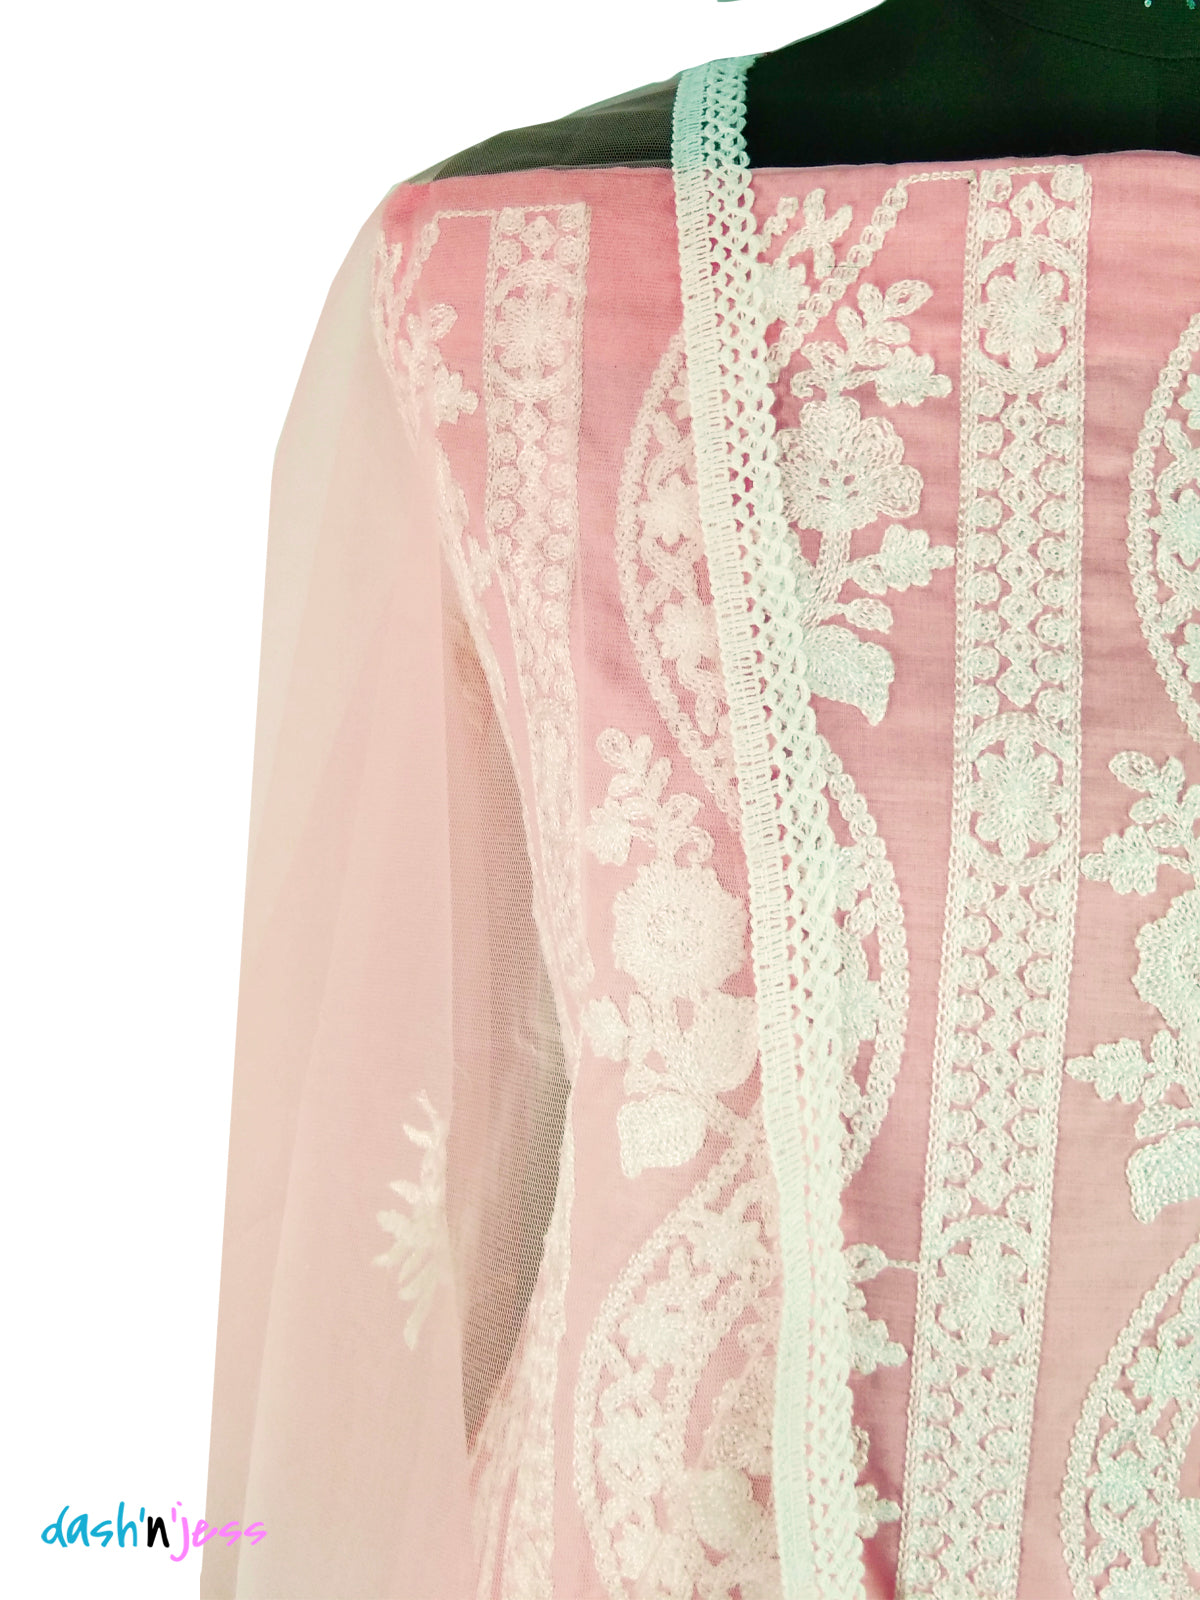 Pink Embroidered Floral, Cotton Salwar Suit (Semi-Stitched )